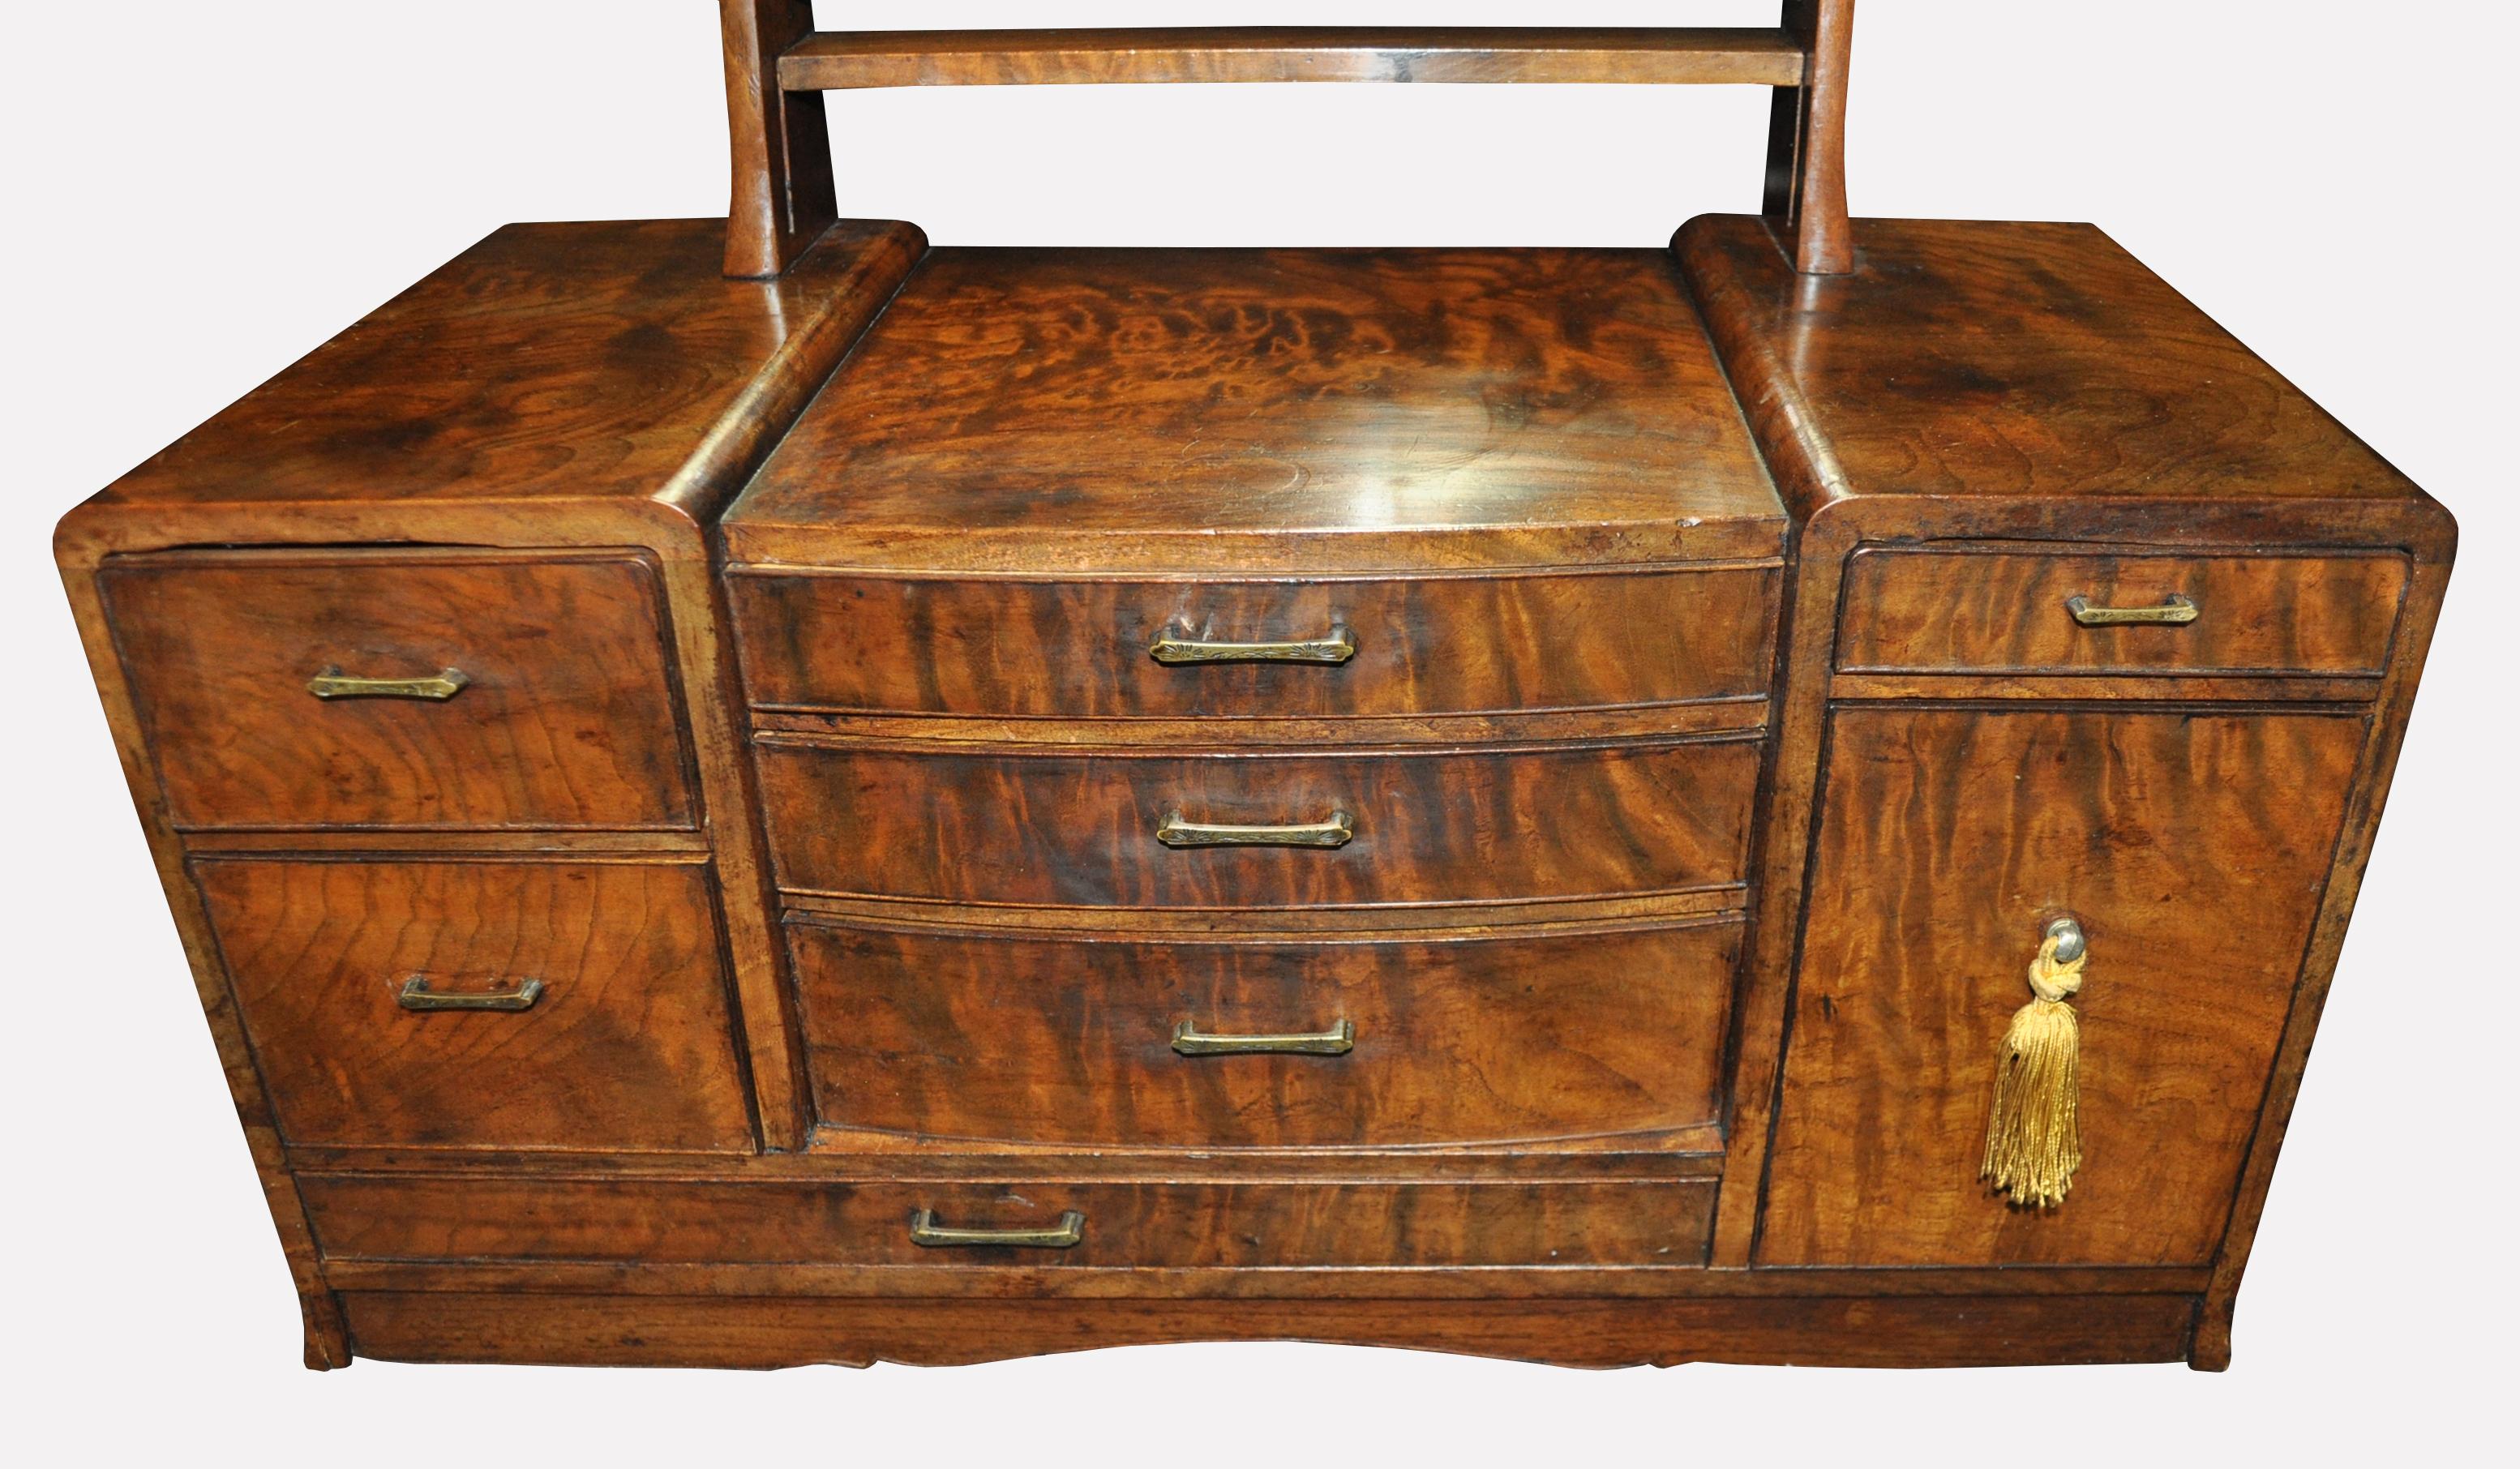 
An antique Japanese 'Kyodai' tansu (vanity chest) with an elegant tall arched mirror and eight drawers of varied size to accommodate a diverse array of personal effects. The pronounced grain of the wood is that of a beautiful Zelkova wood burl, a